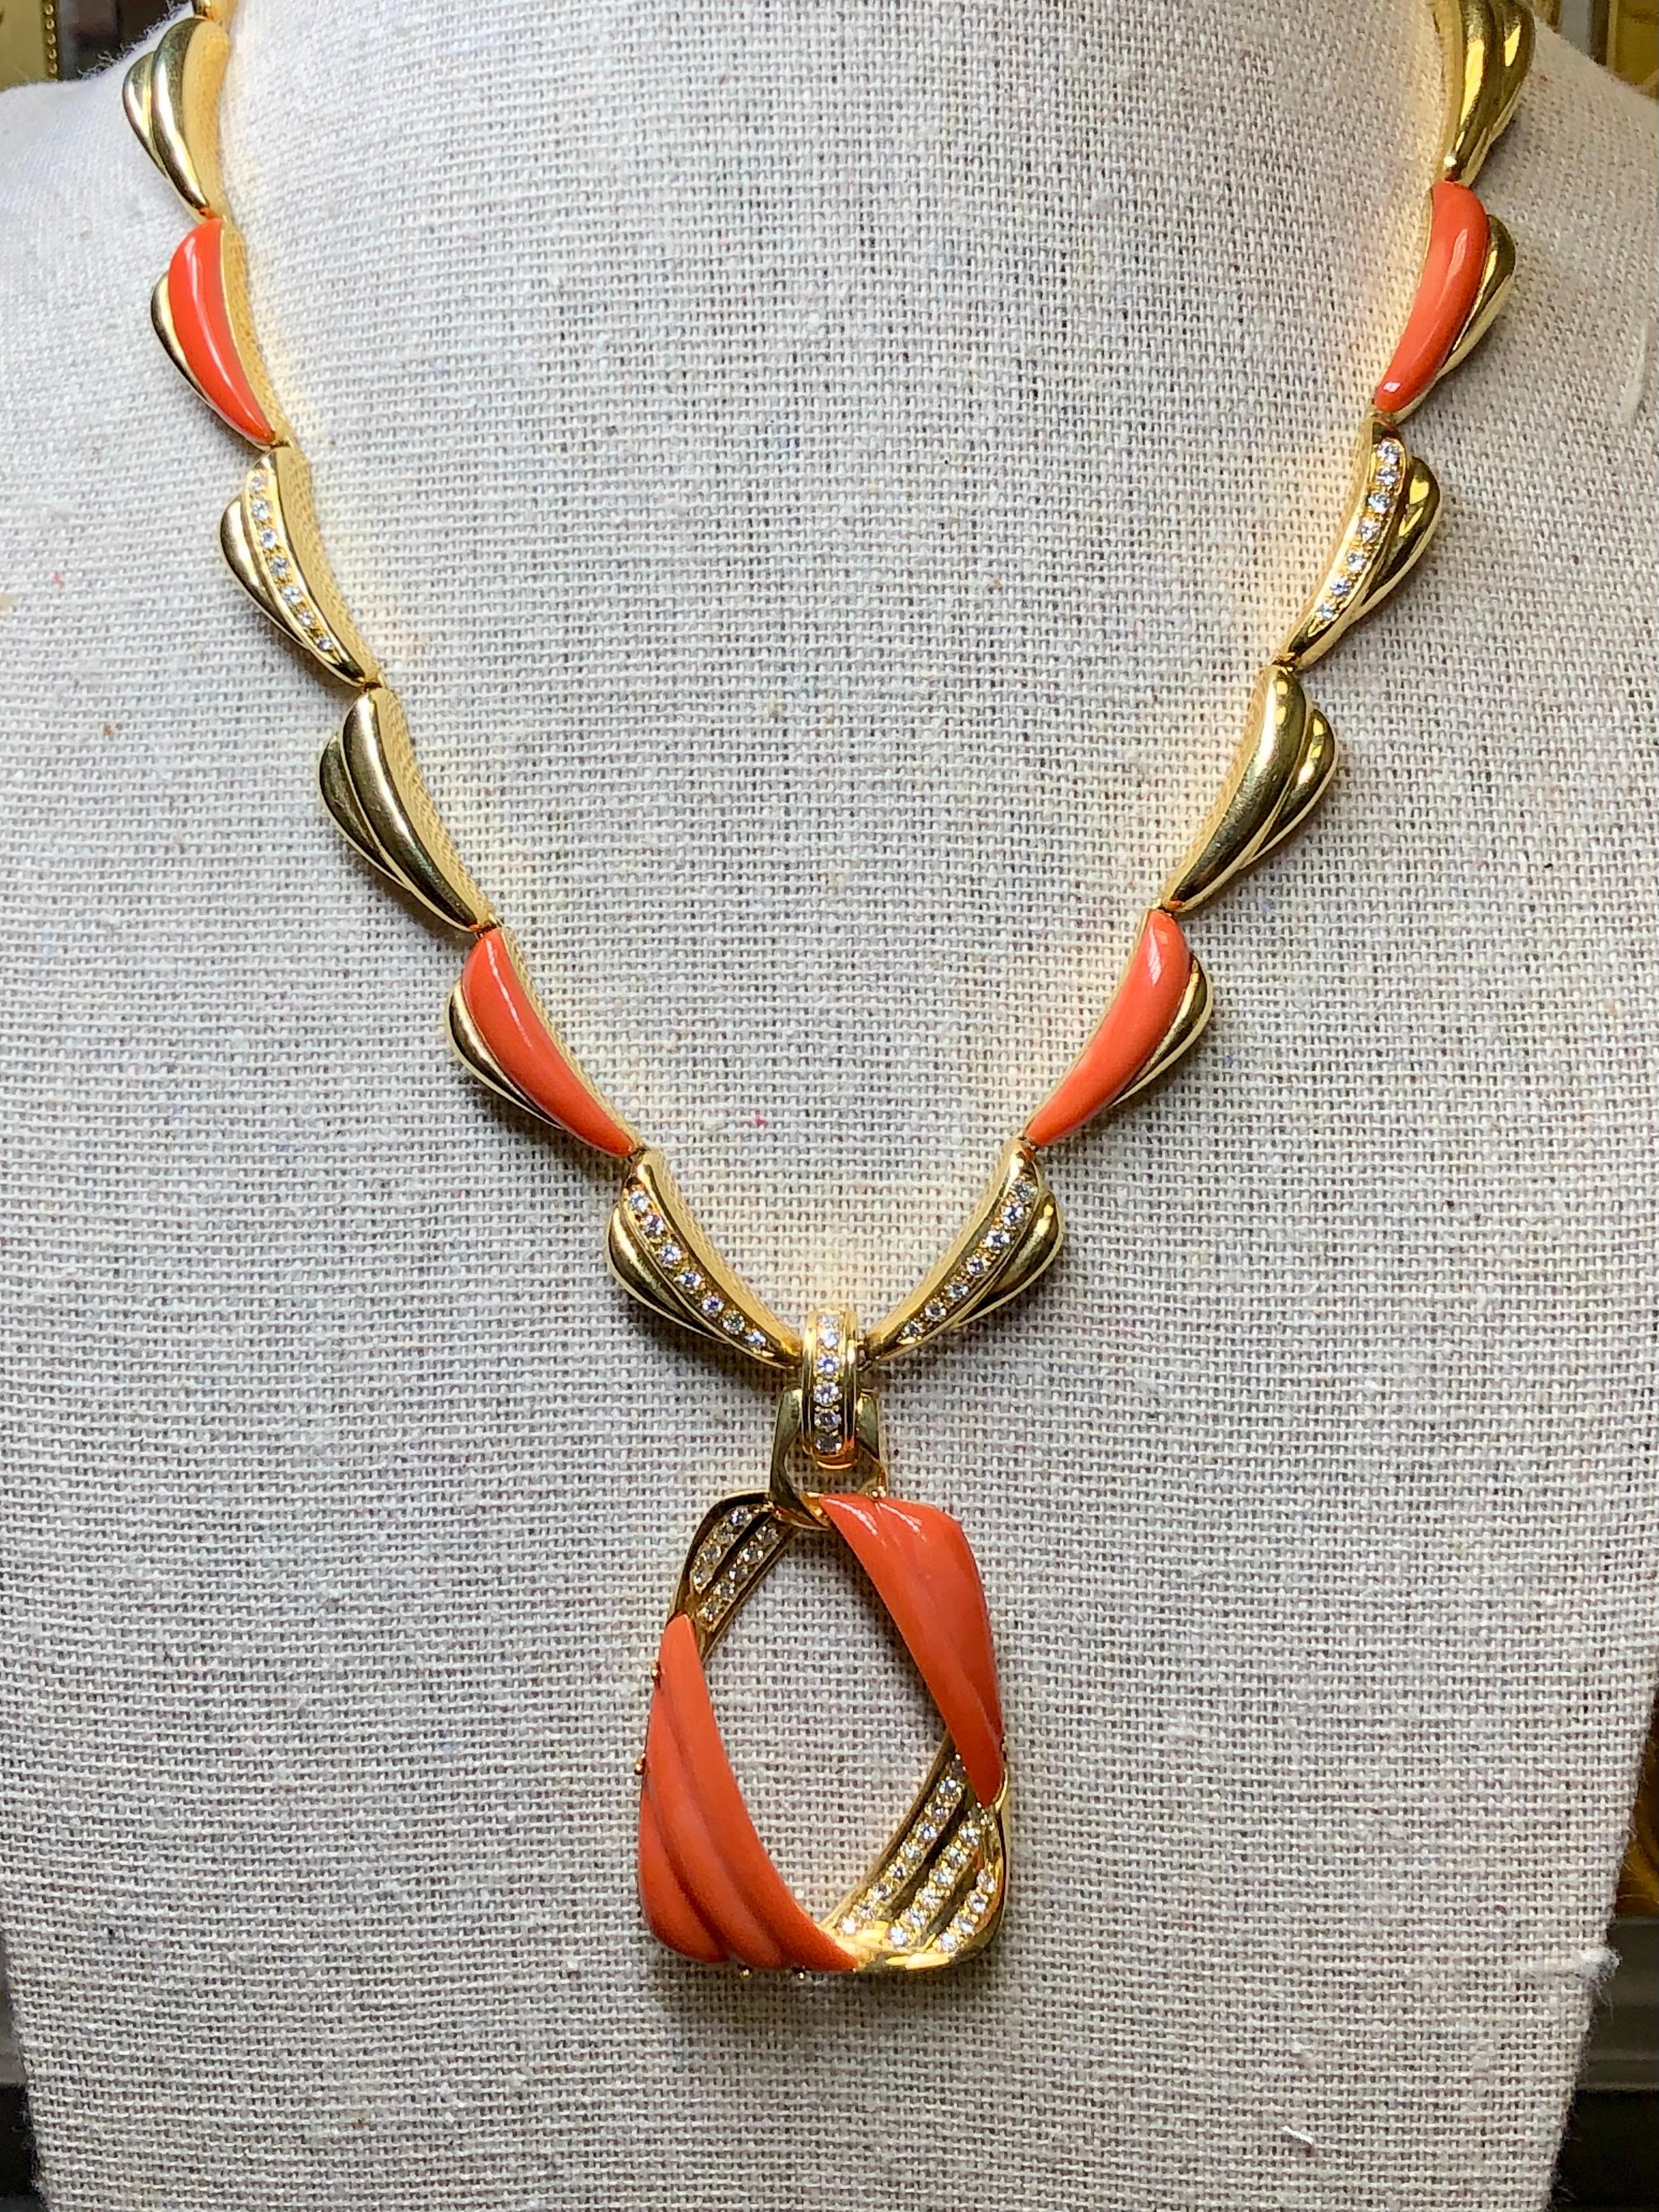 Vintage Italian 18K Carved Inlaid Coral Diamond Necklace Pendant  In Good Condition For Sale In Winter Springs, FL